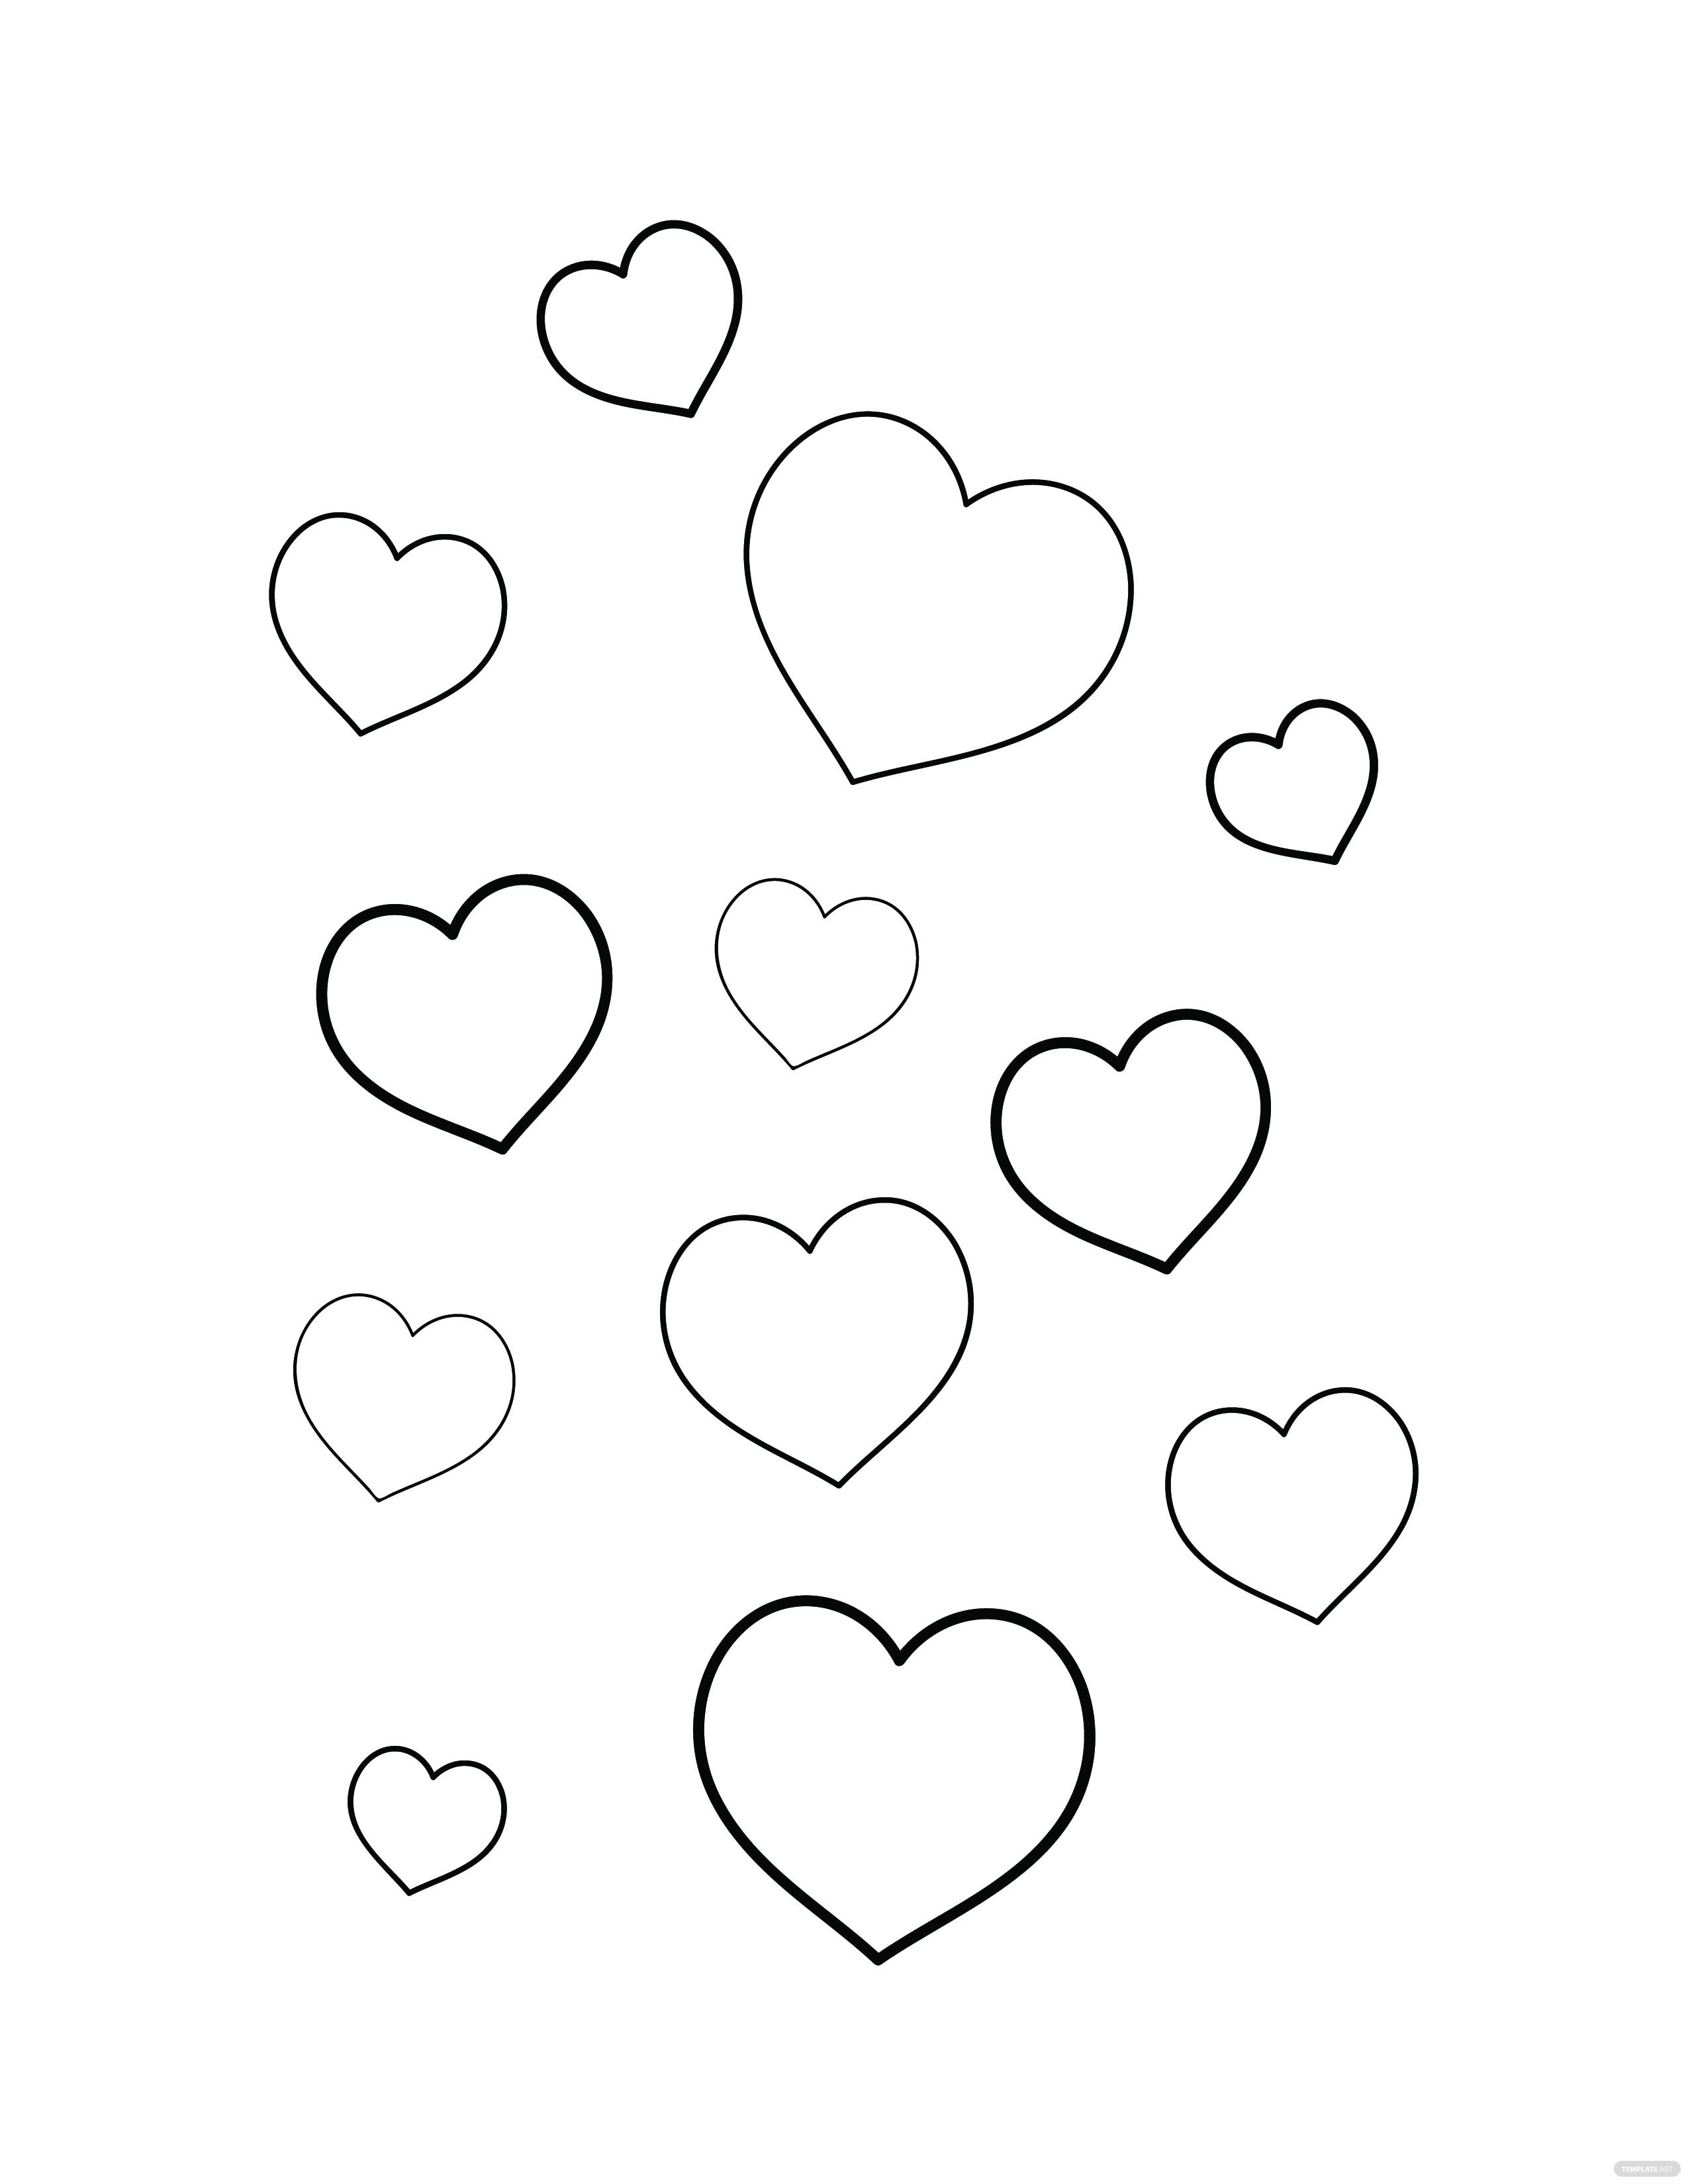 Free Small Heart Coloring Page - EPS, Illustrator, JPG, PNG, PDF, SVG |  Template.net